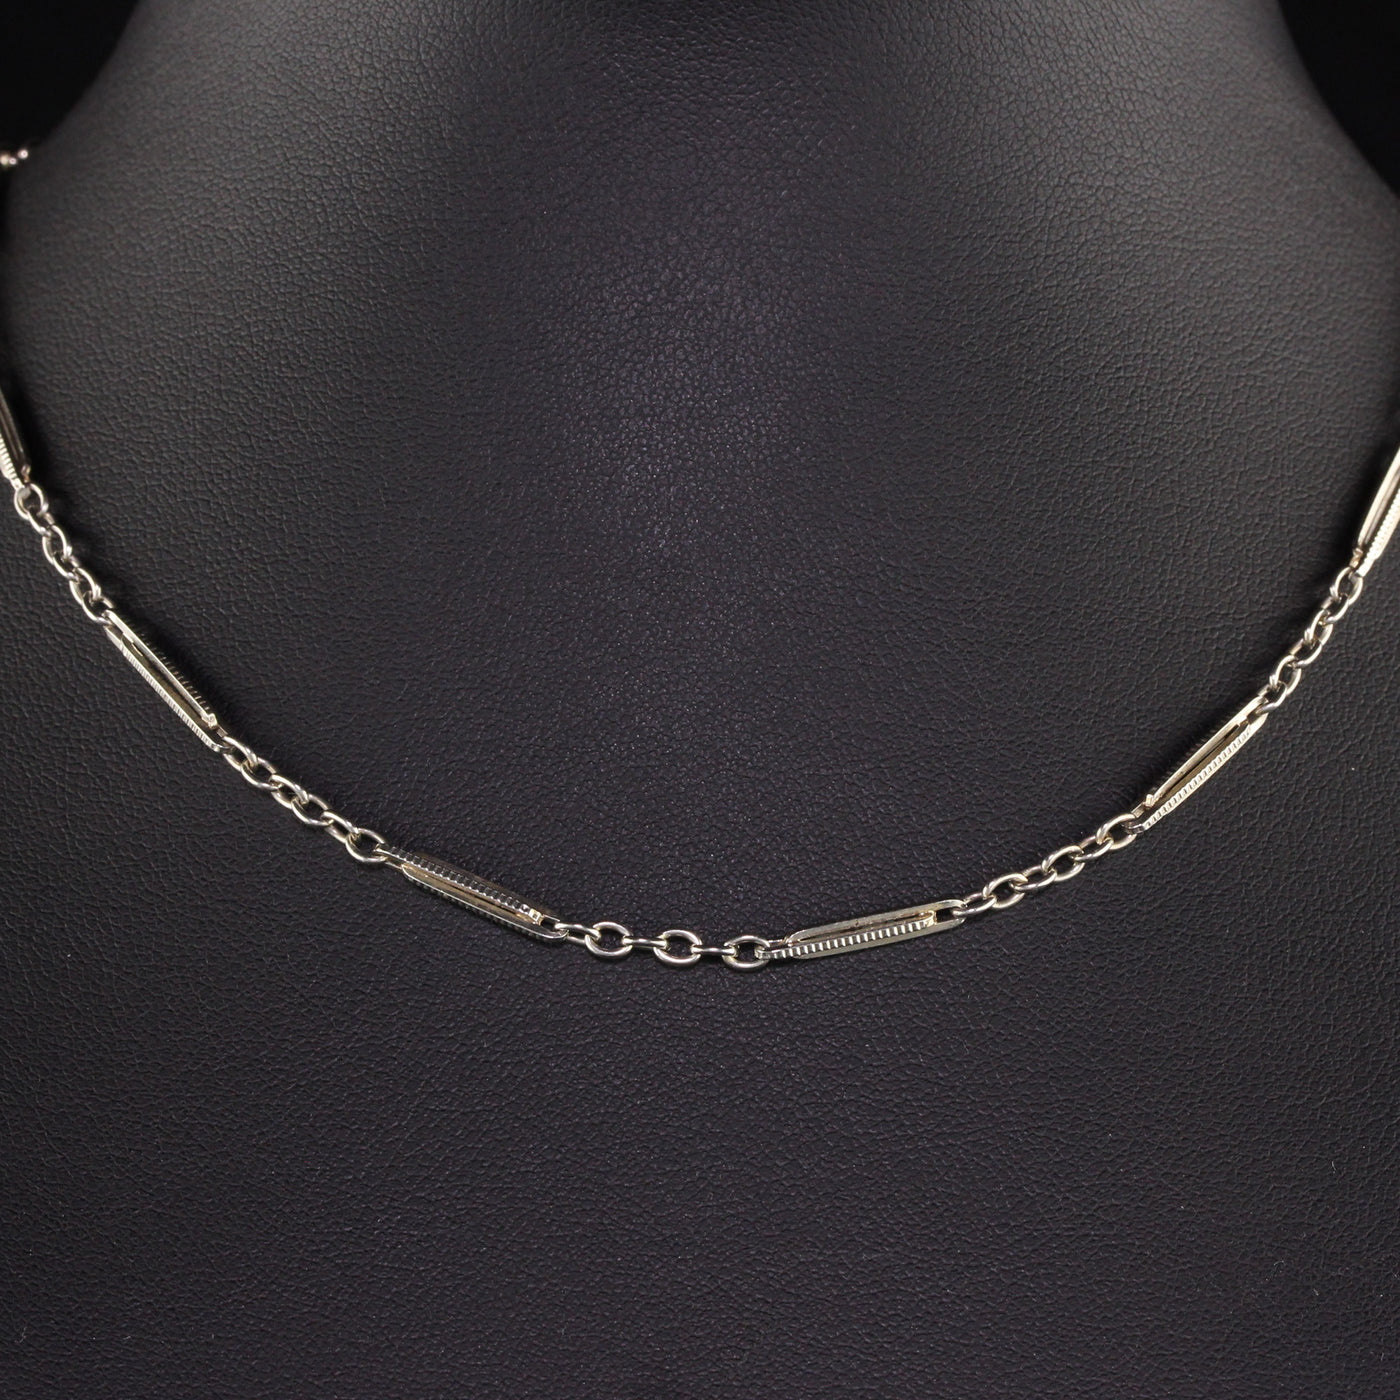 Antique Art Deco 18K White Gold Intricate Link Chain - 14 inches